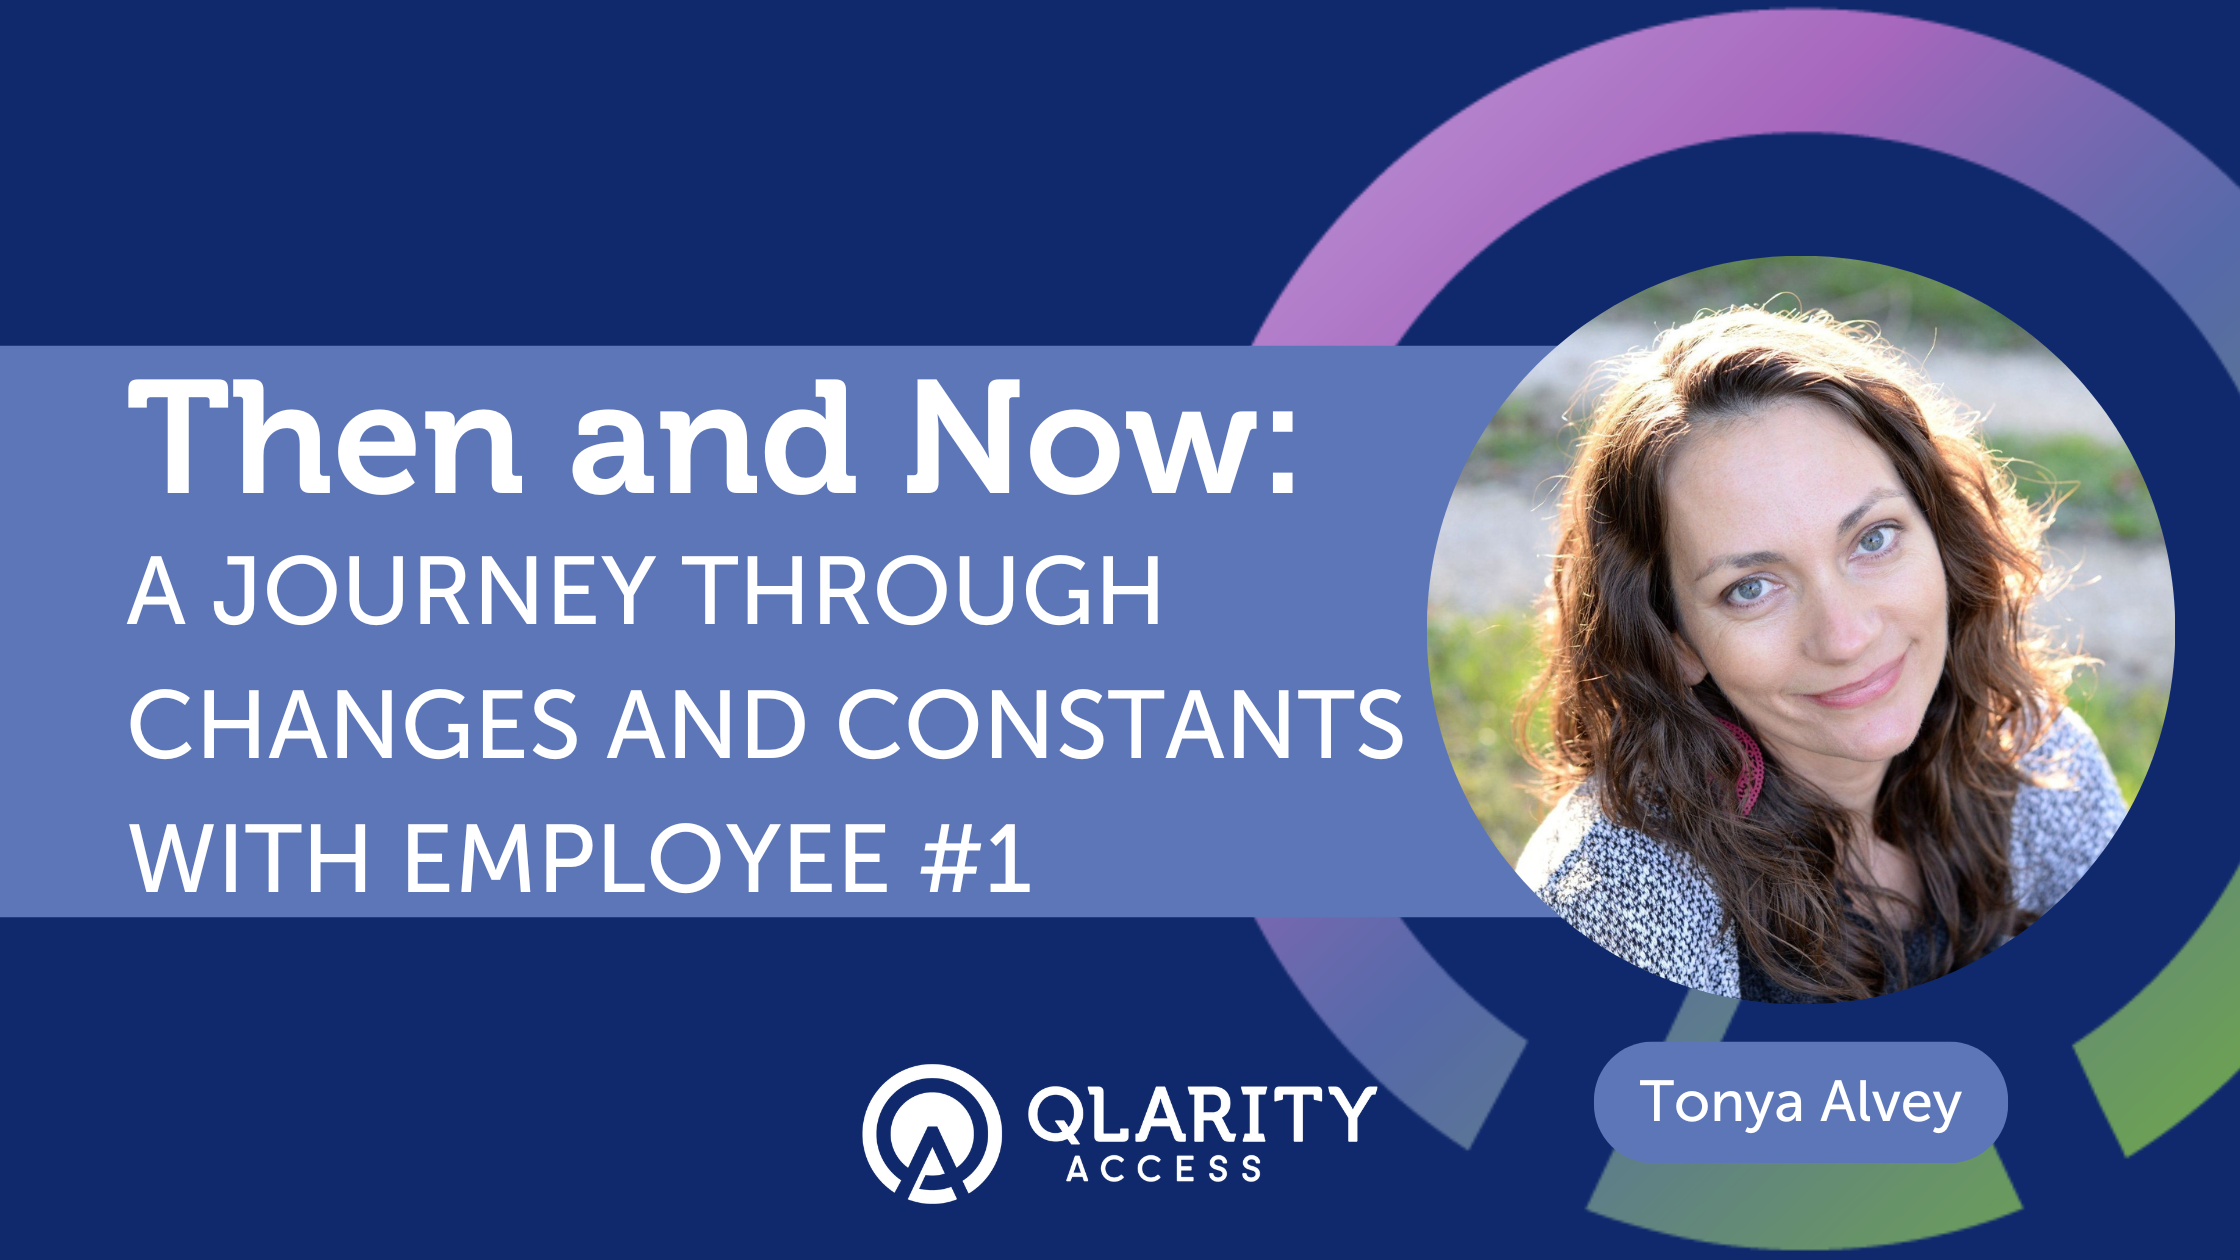 Then and Now: A Journey Through Changes and Constants with Employee #1